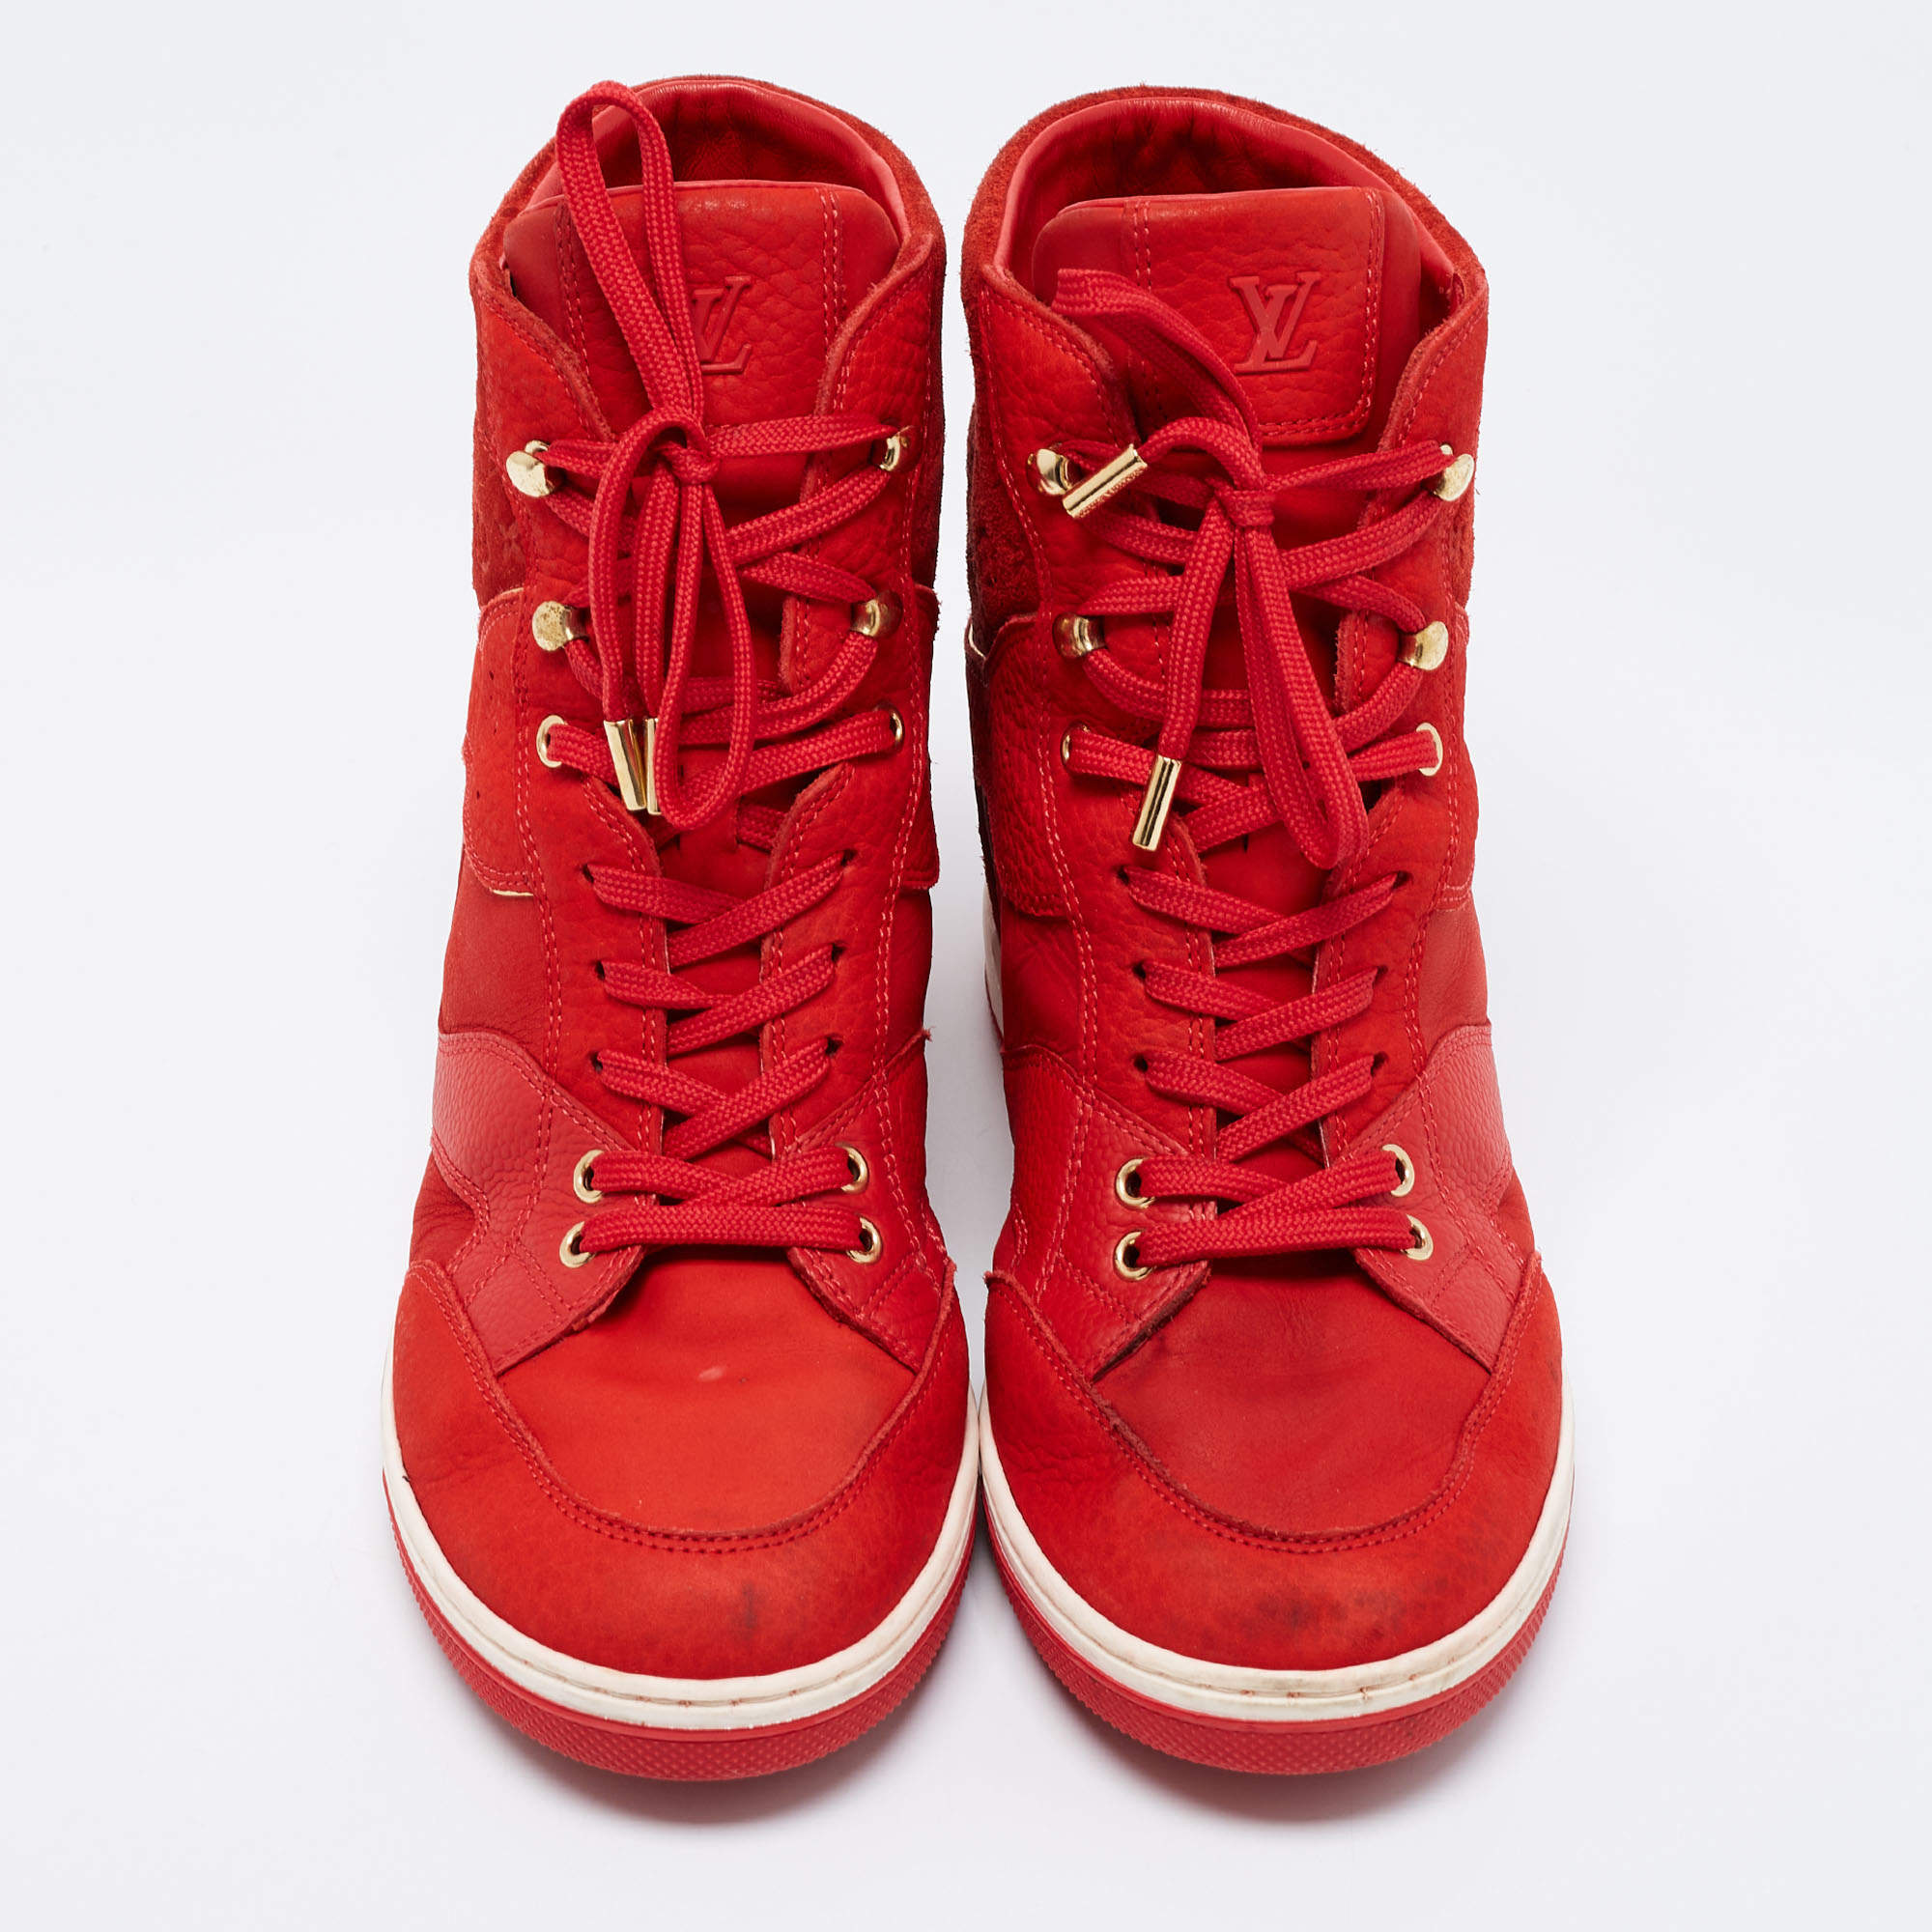 Louis Vuitton Red Monogram Suede Leather Wedge Sneakers Size 5.5